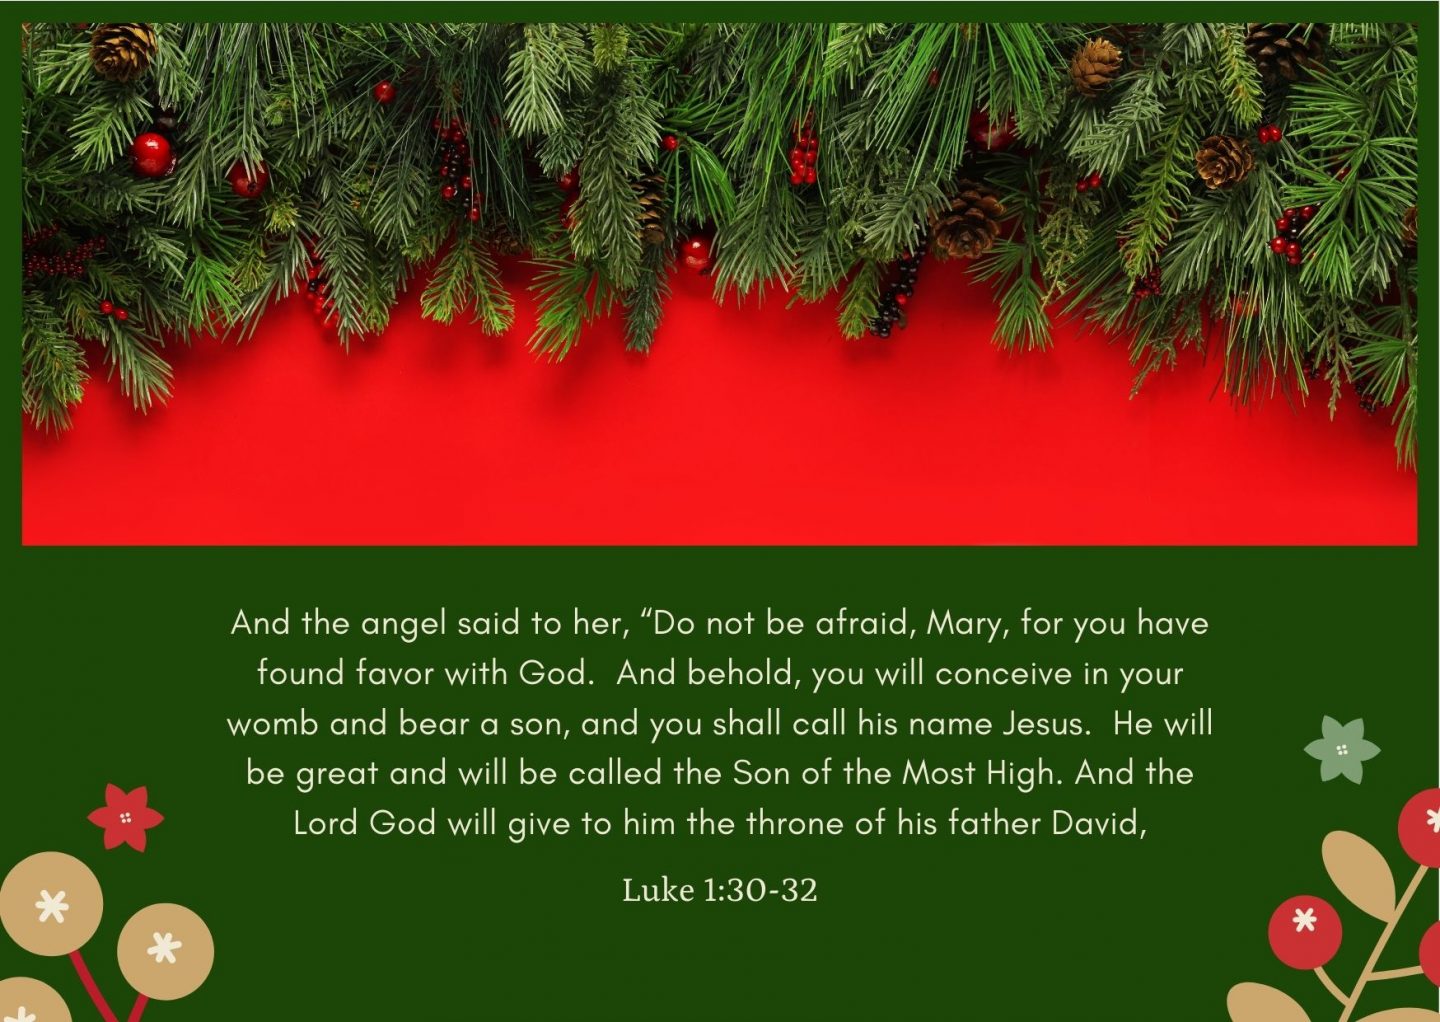 And the angel said to her, “Do not be afraid, Mary, for you have found favor with God.  And behold, you will conceive in your womb and bear a son, and you shall call his name Jesus.  He will be great and will be called the Son of the Most High. And the Lord God will give to him the throne of his father David, Luke 1:30-32